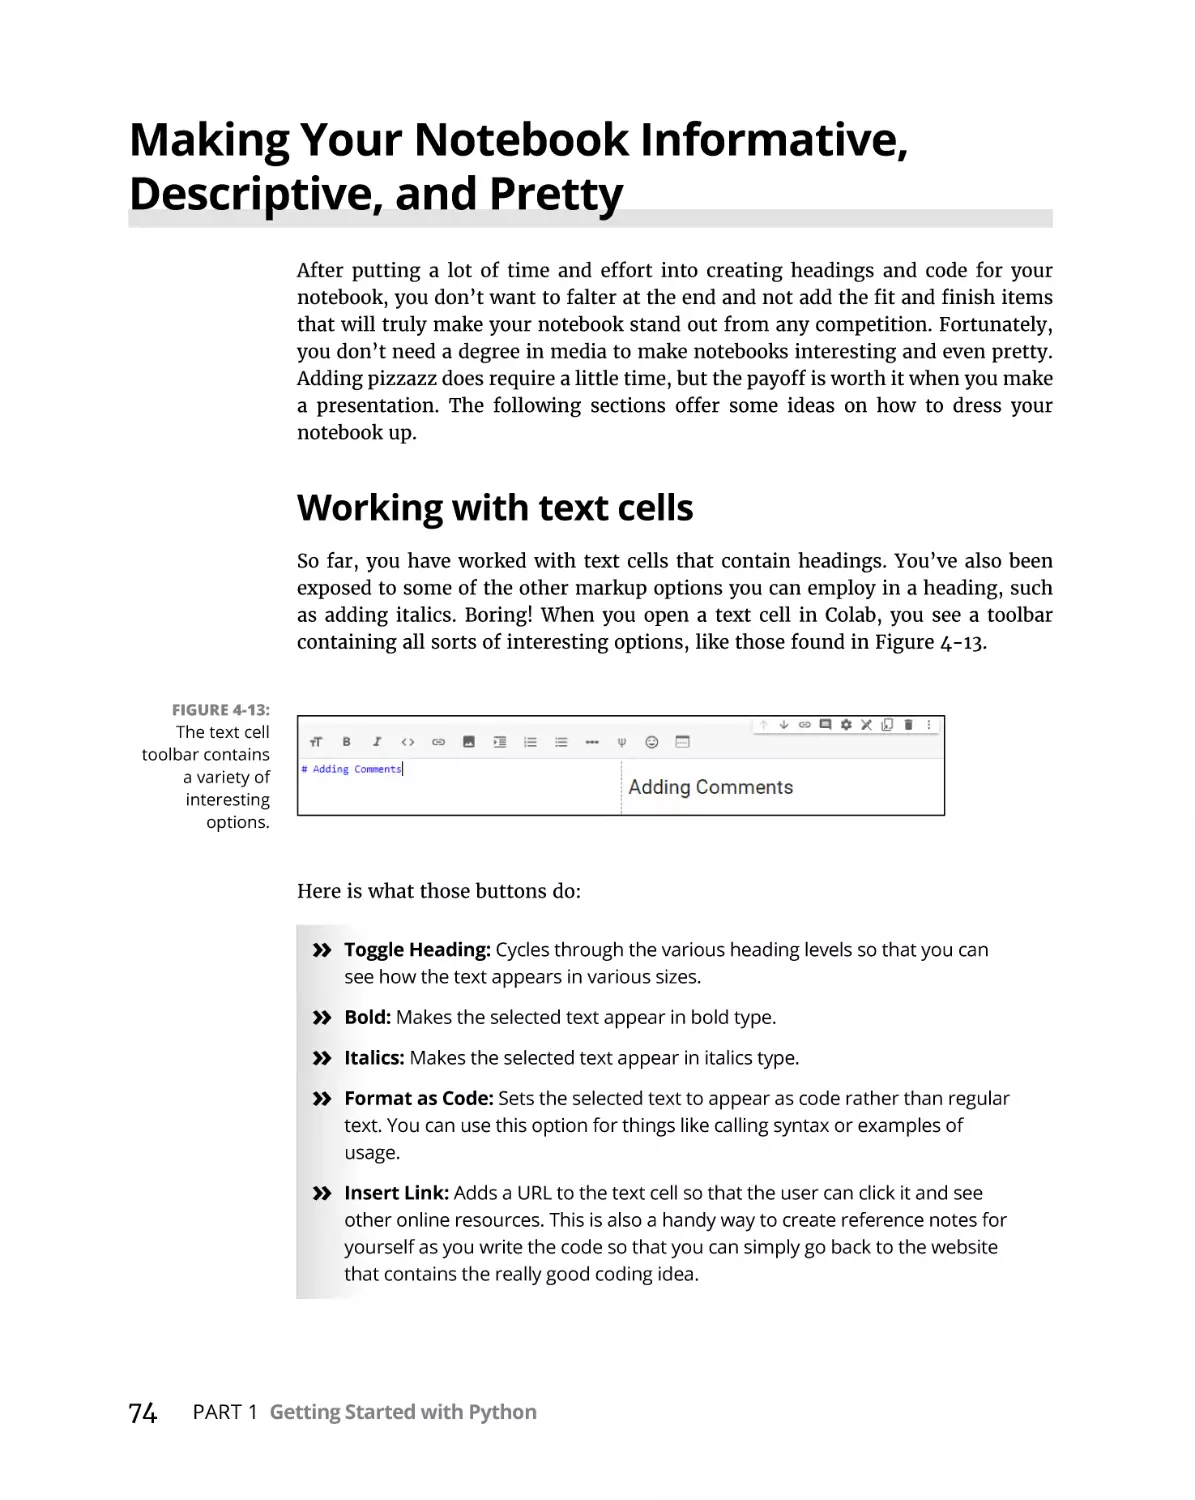 Making Your Notebook Informative, Descriptive, and Pretty
Working with text cells